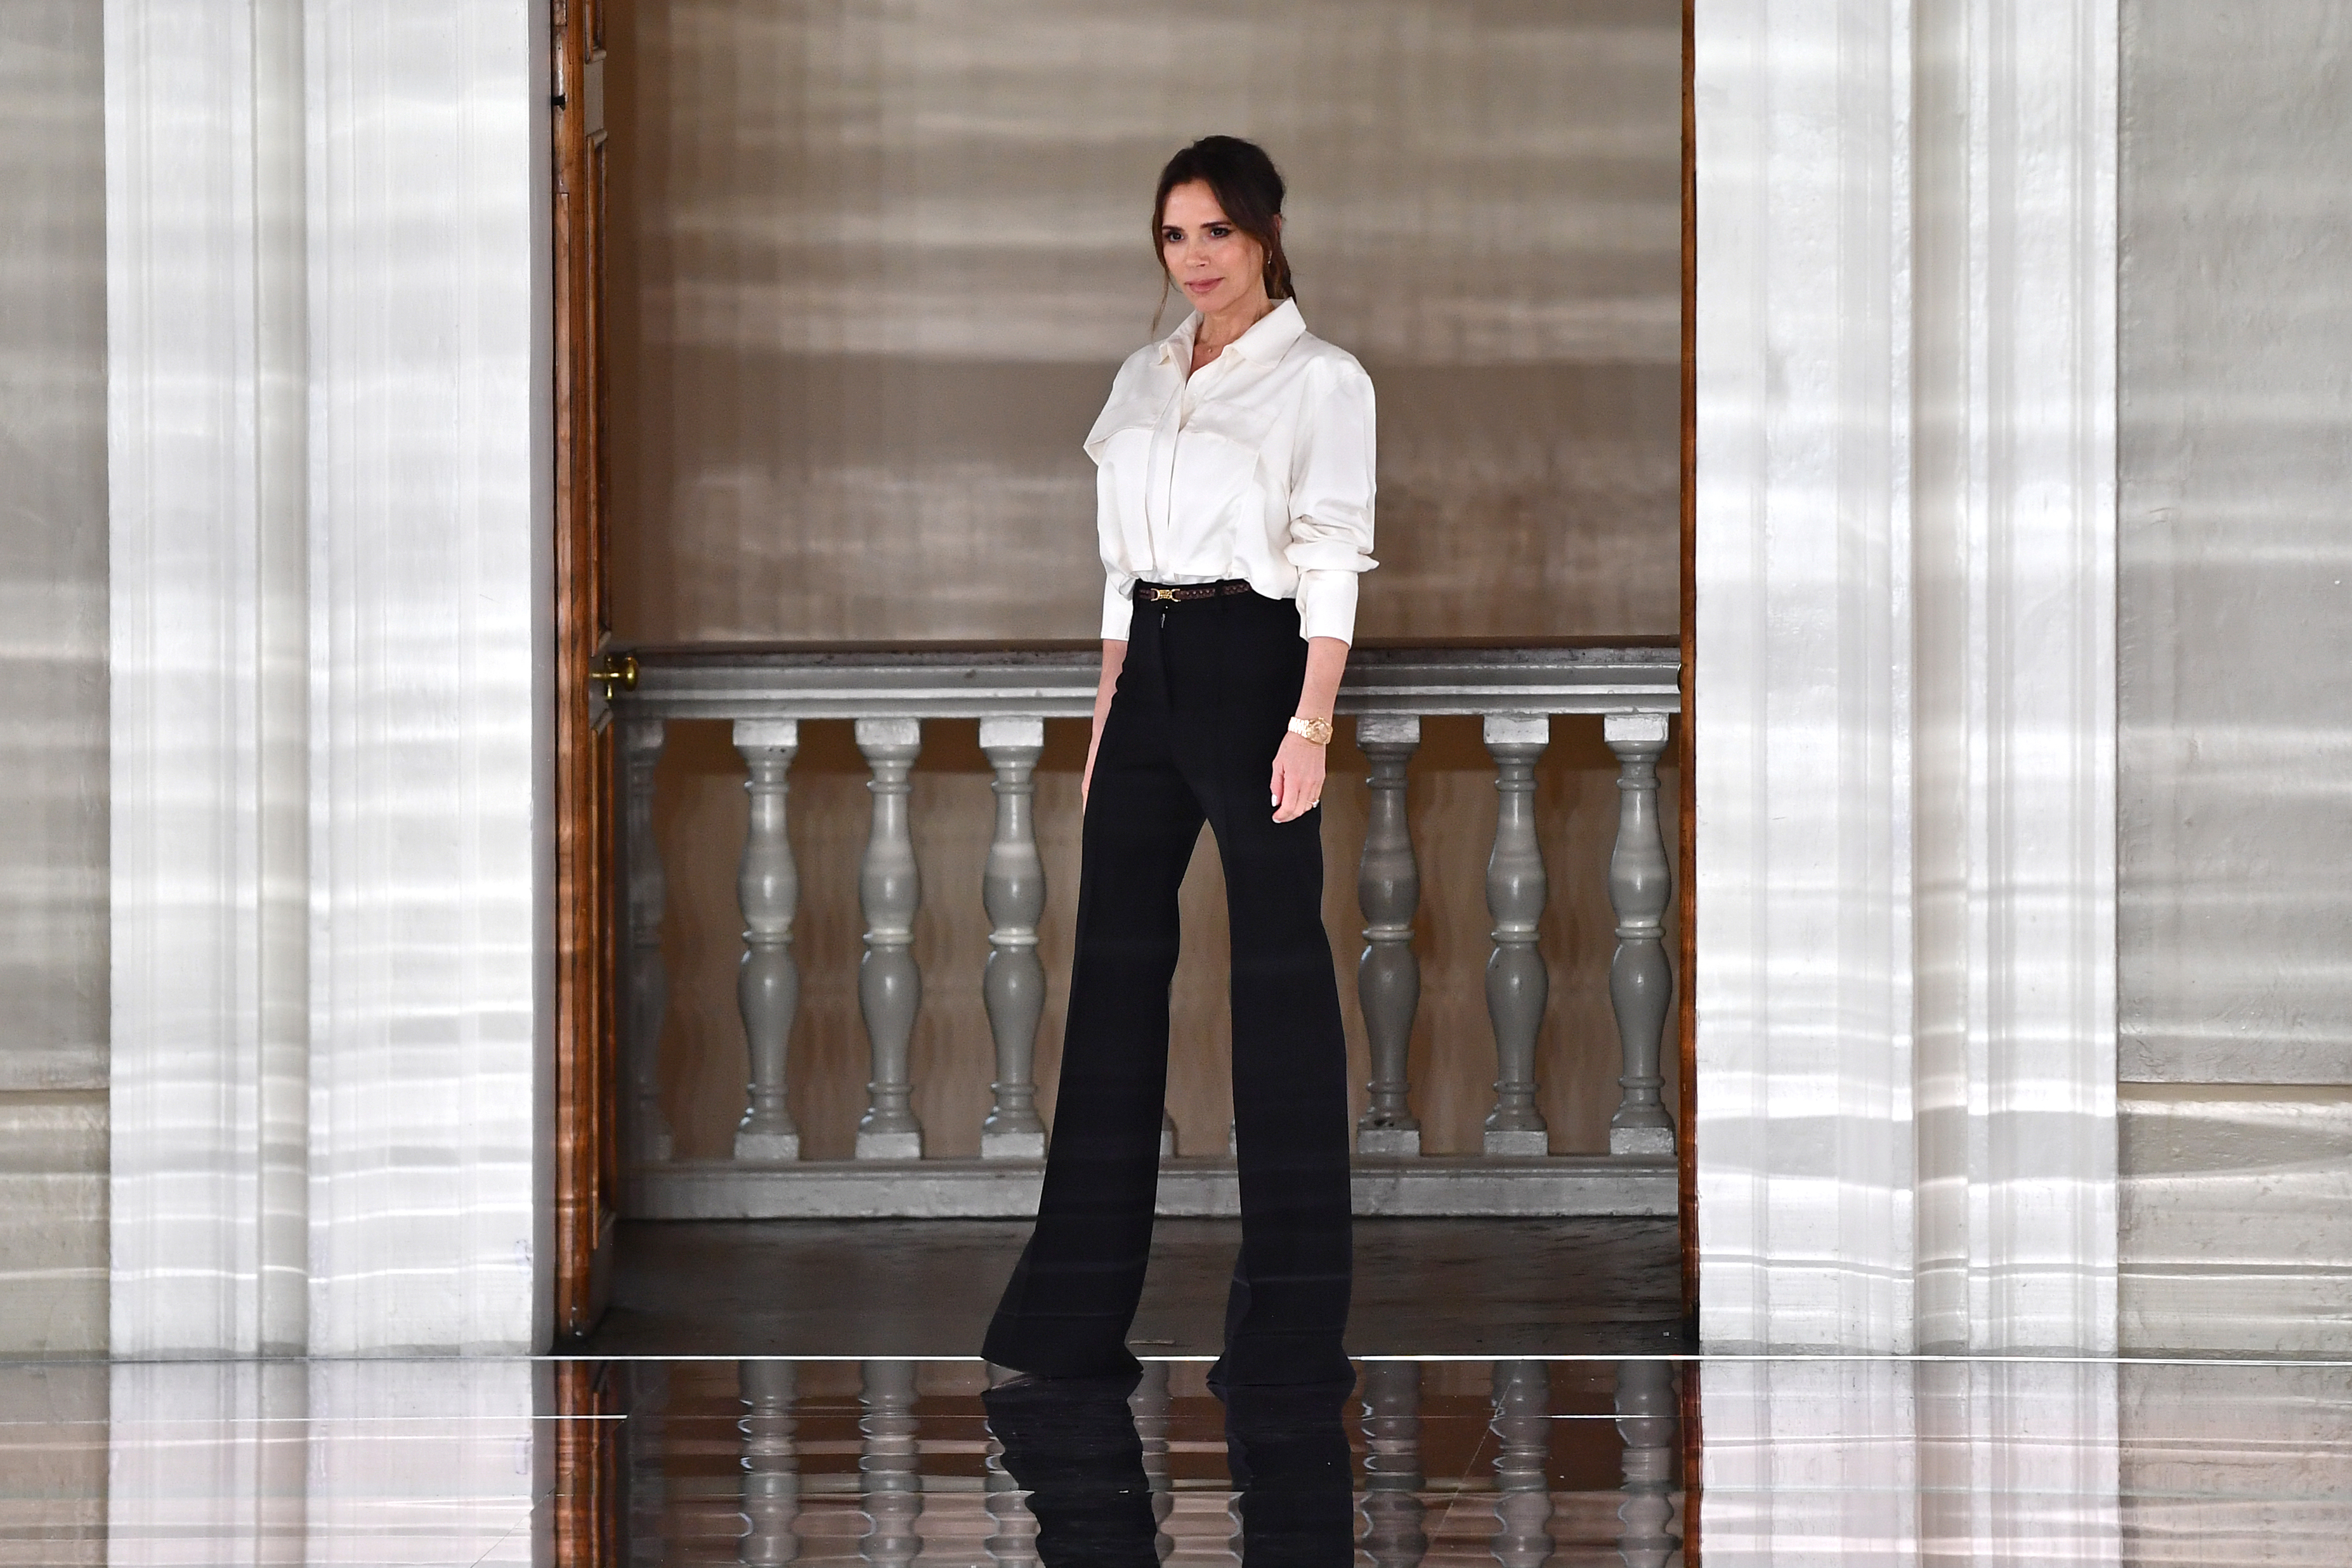 Victoria Beckham’s walk mocked in viral video—”Ridiculous shoes”